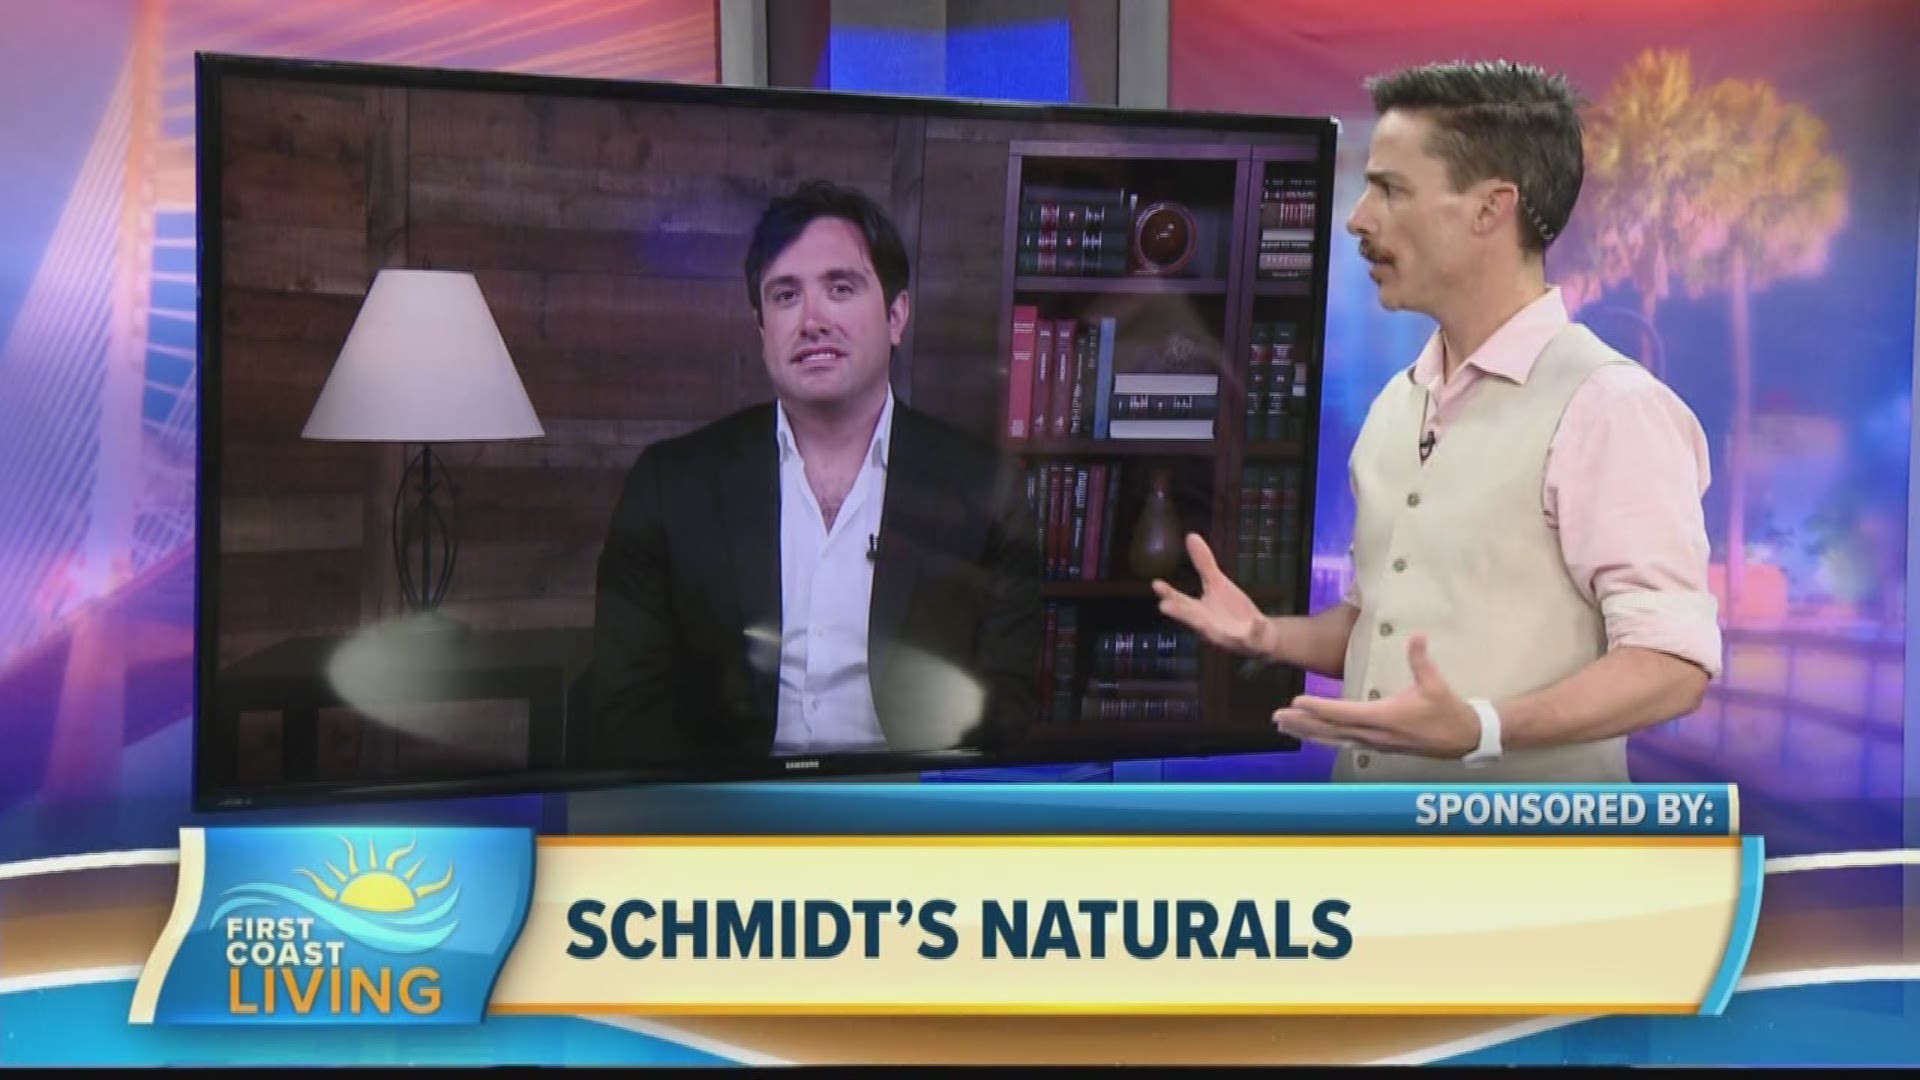 Justin Bieber team's up with Schmidt's Naturals to launch special edition deodorant scent was inspired by the idea of self-care and being present and will be available at retail outlets in Fall 2019.